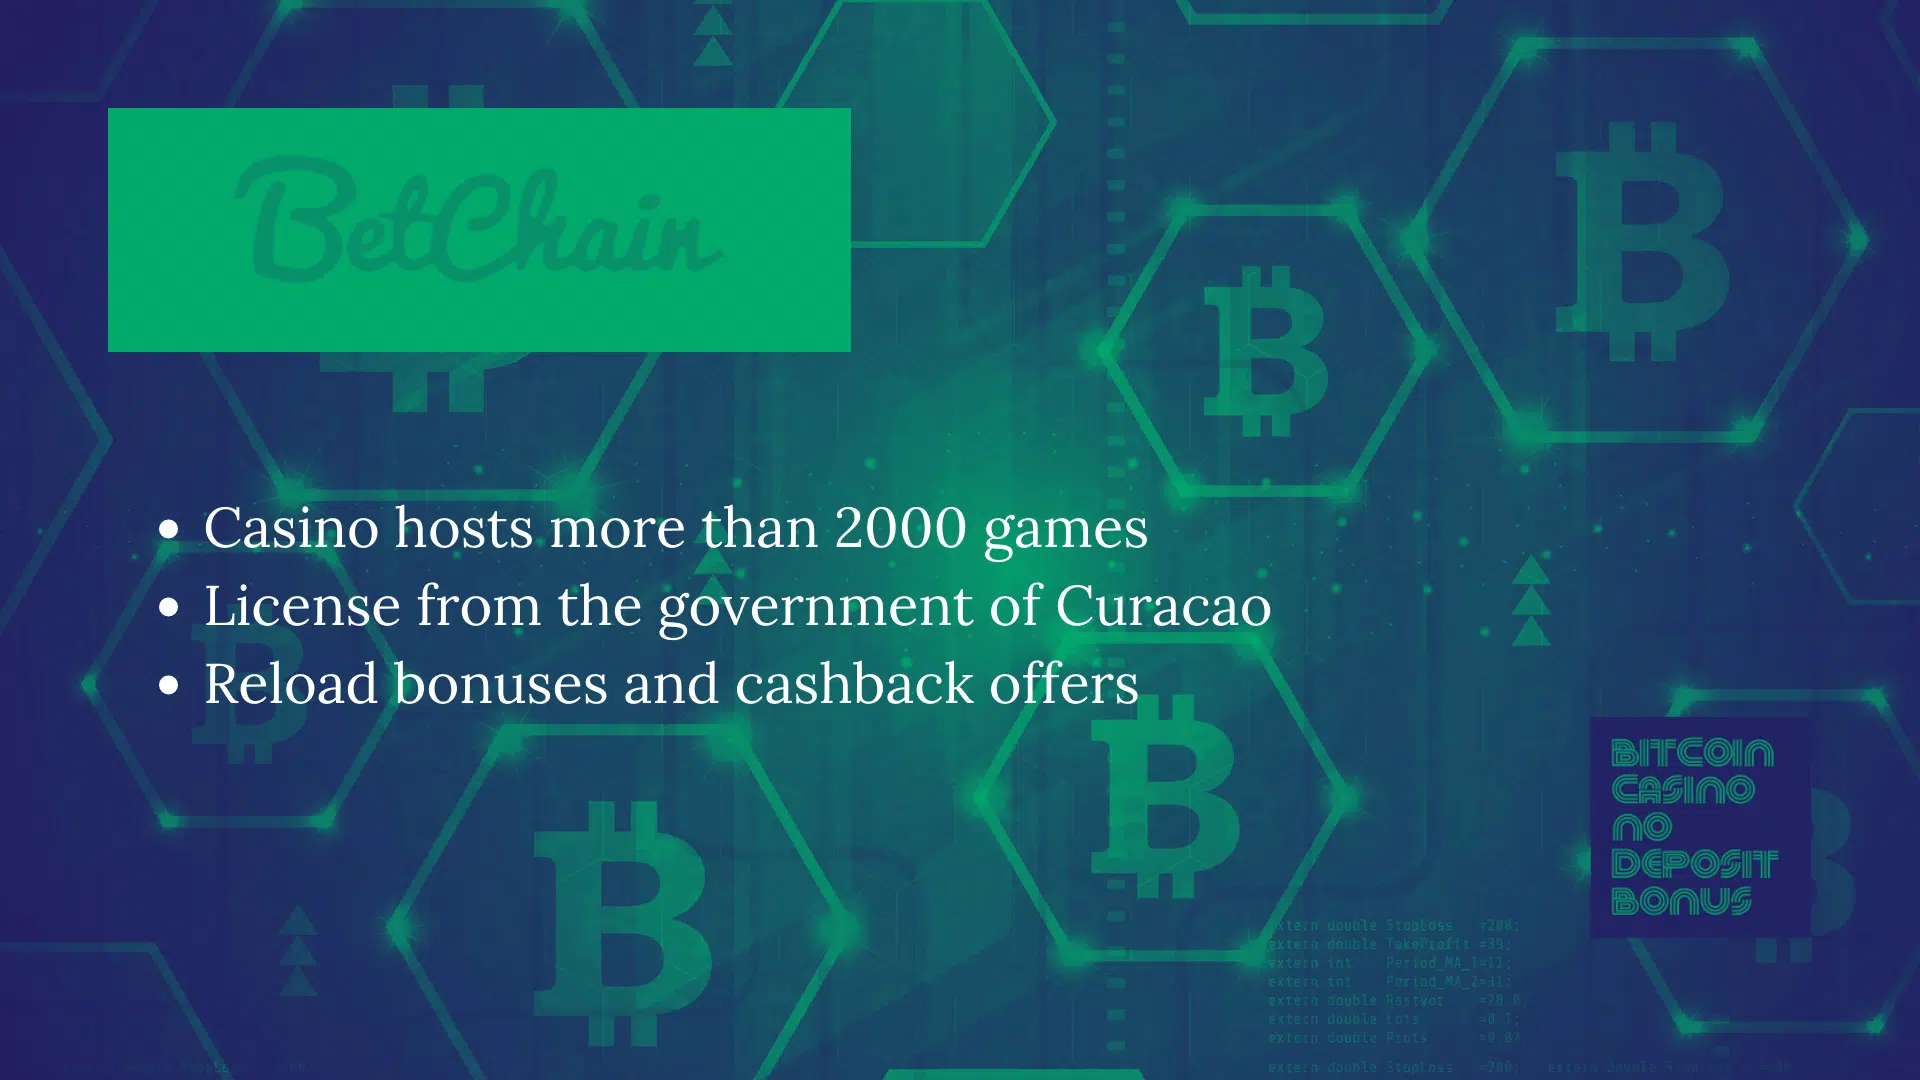 You are currently viewing BetChain Casino Bonus Codes – BetChain.com Free Spins No Deposit